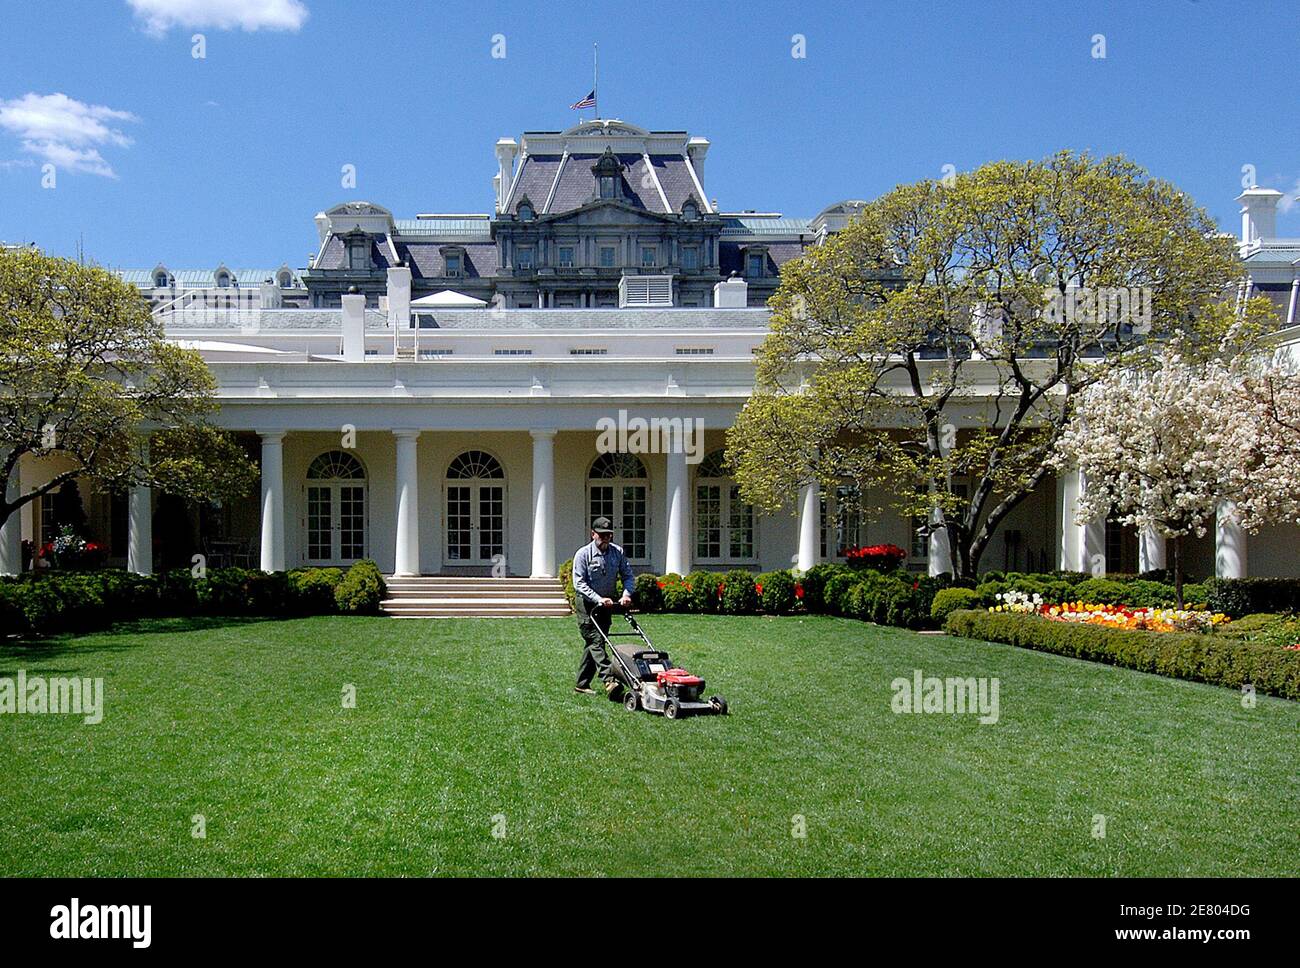 Inside look of the garden of the White House during a media preview of the 2007 Spring Garden Tour on April 20 2007 in Washington DC, USA. Photo by Olivier Douliery/ABACAPRESS.COM Stock Photo